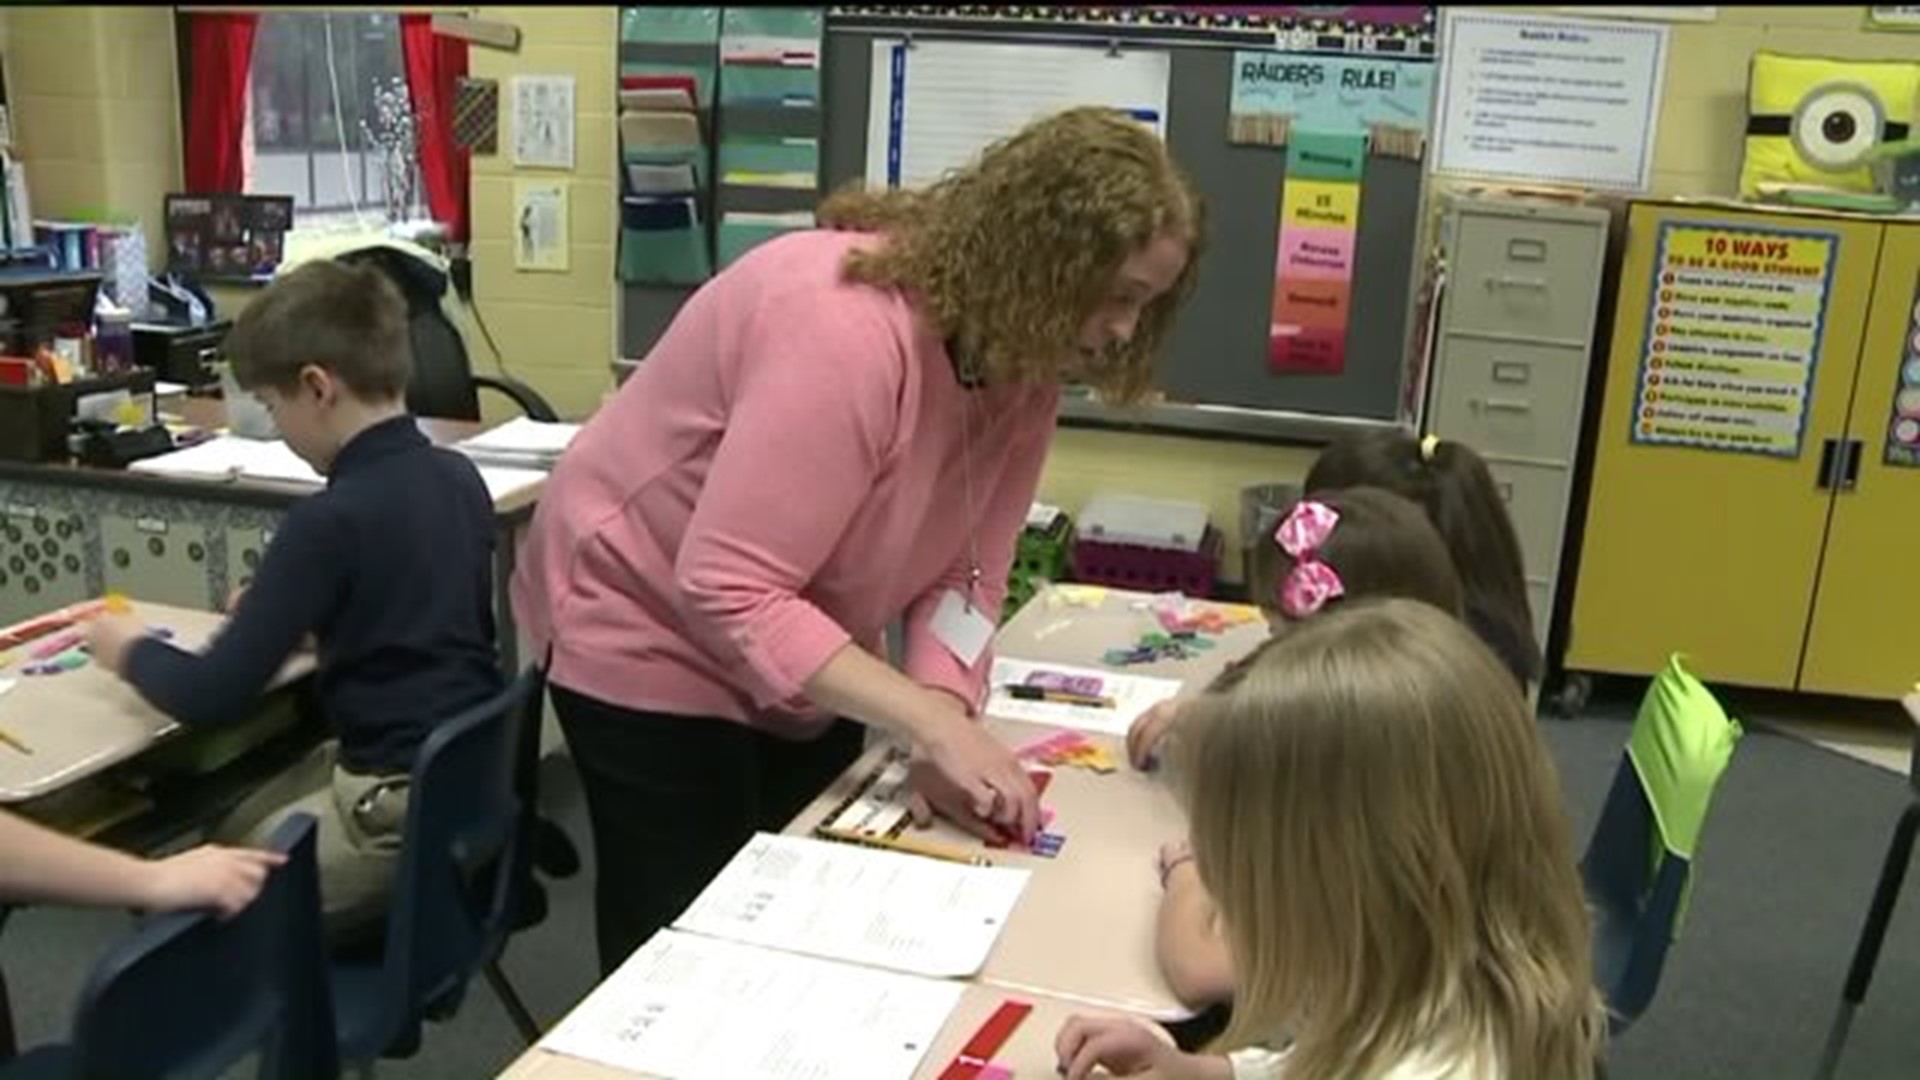 Tamaqua Educator Up For Teacher of the Year